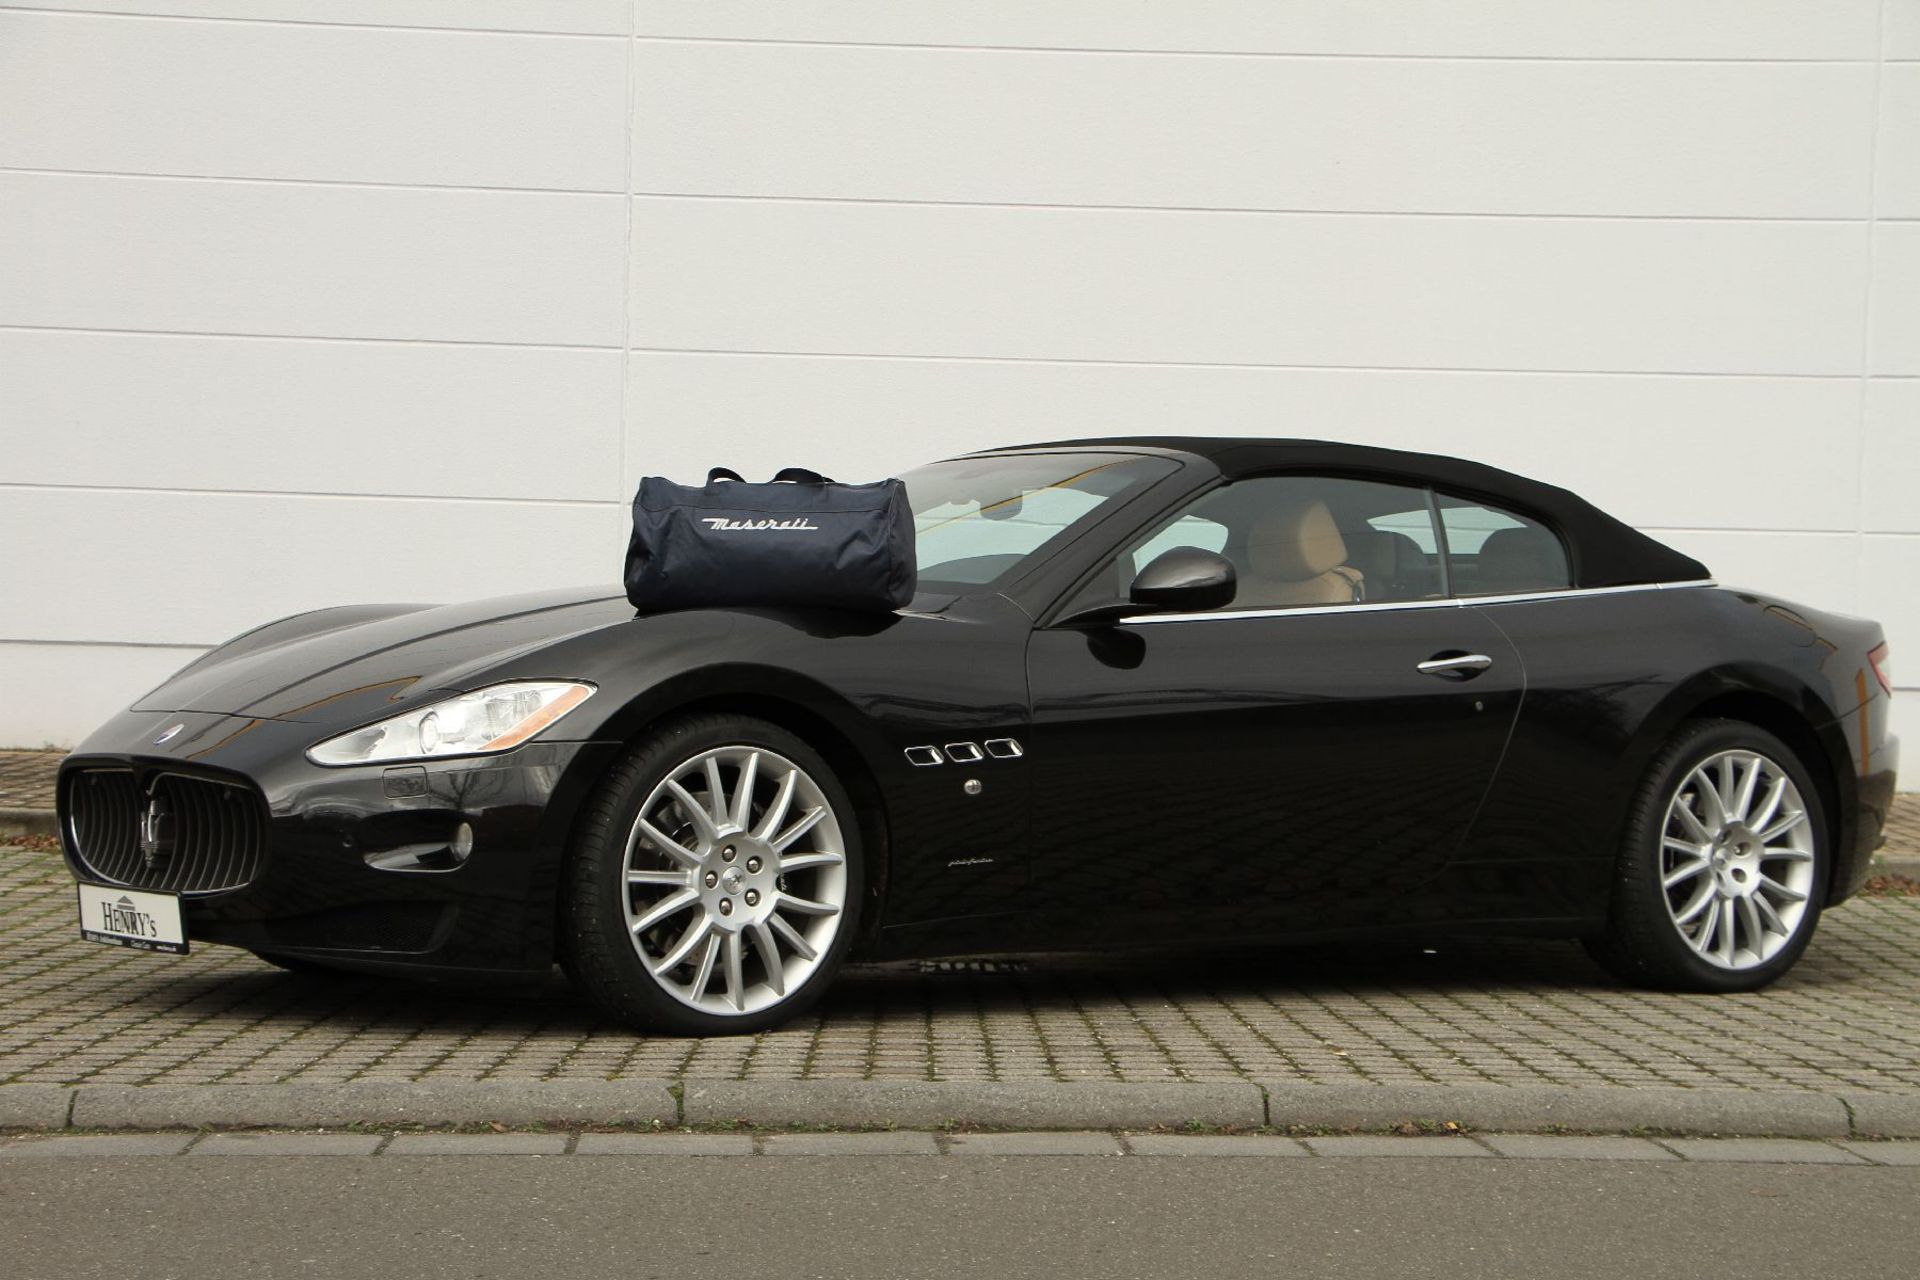 Maserati Grand Cabrio, Chassis Number: ZAMKM45B000052657, first registered 04/2010, two owners, - Bild 2 aus 15